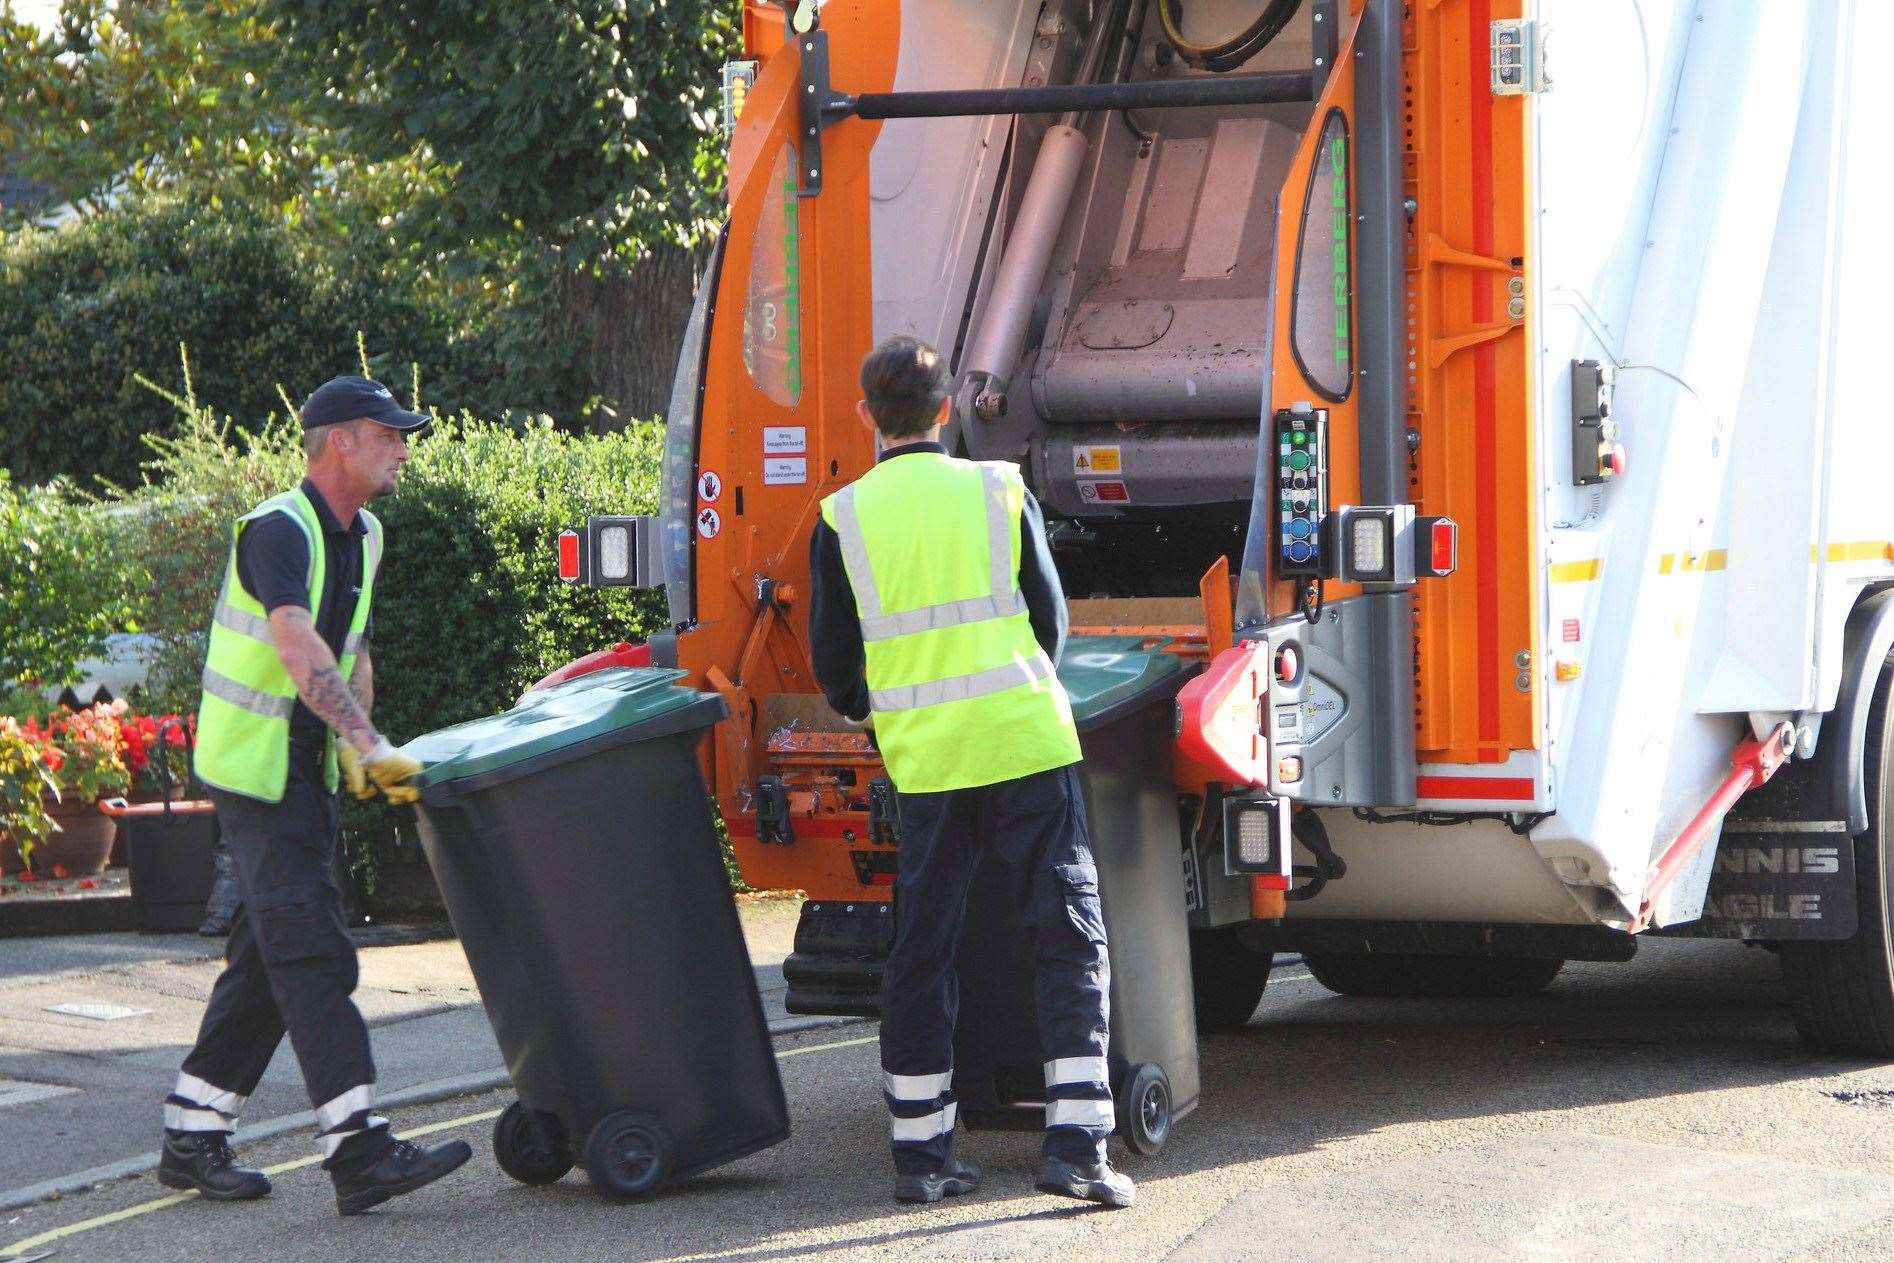 Ashford Borough Council say bin collection days could change as part of the new contract